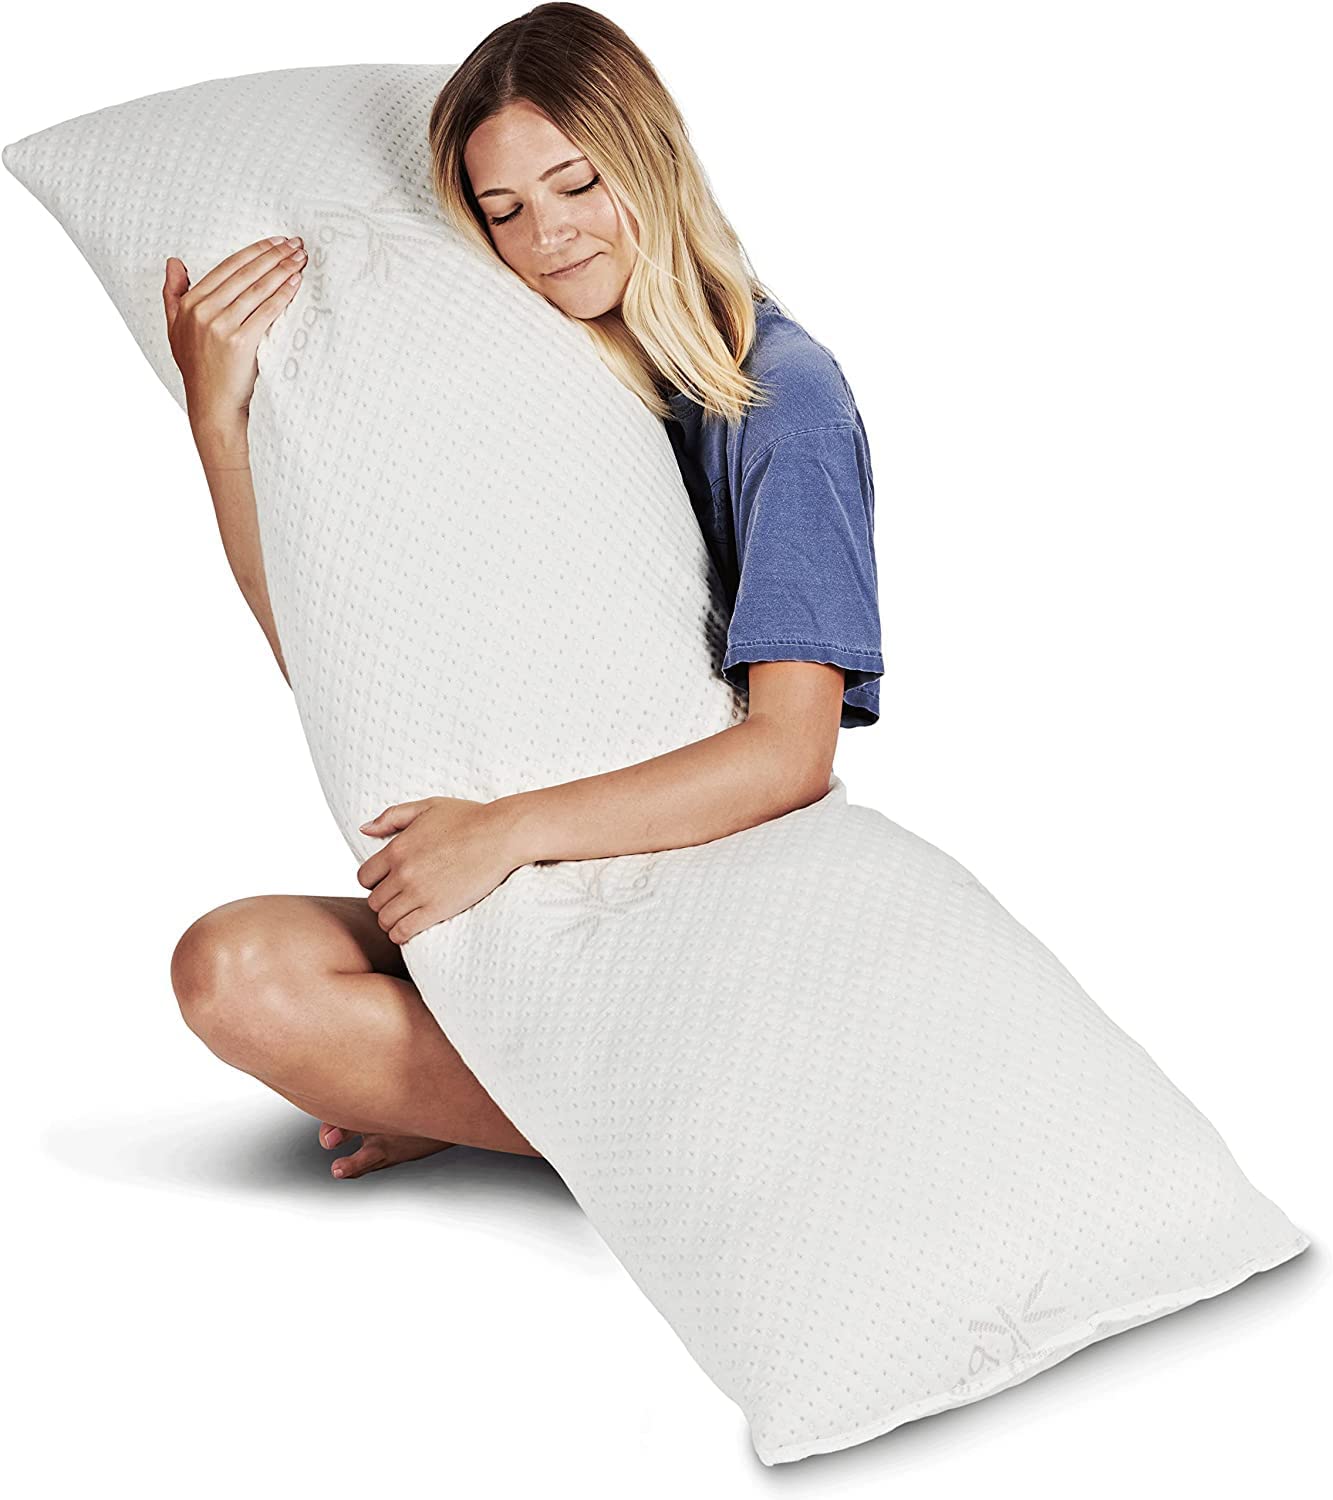 10. Snuggle-Pedic Full Body Pillow for Adults